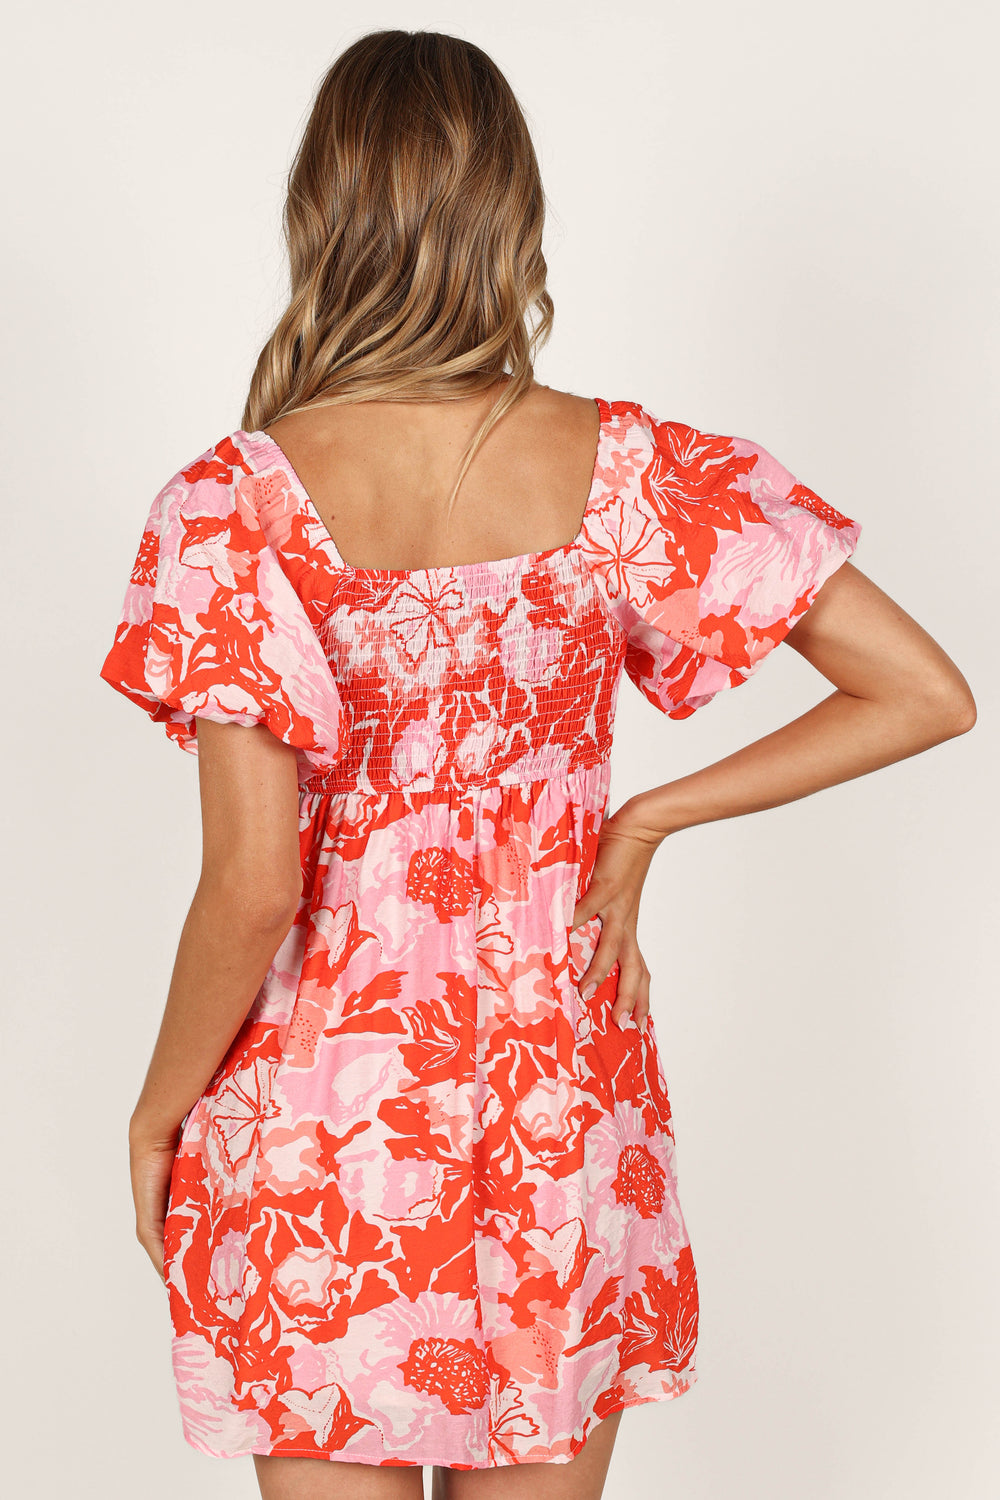 Petal and Pup USA DRESSES Maggie Mini Dress - Pink/Red Floral